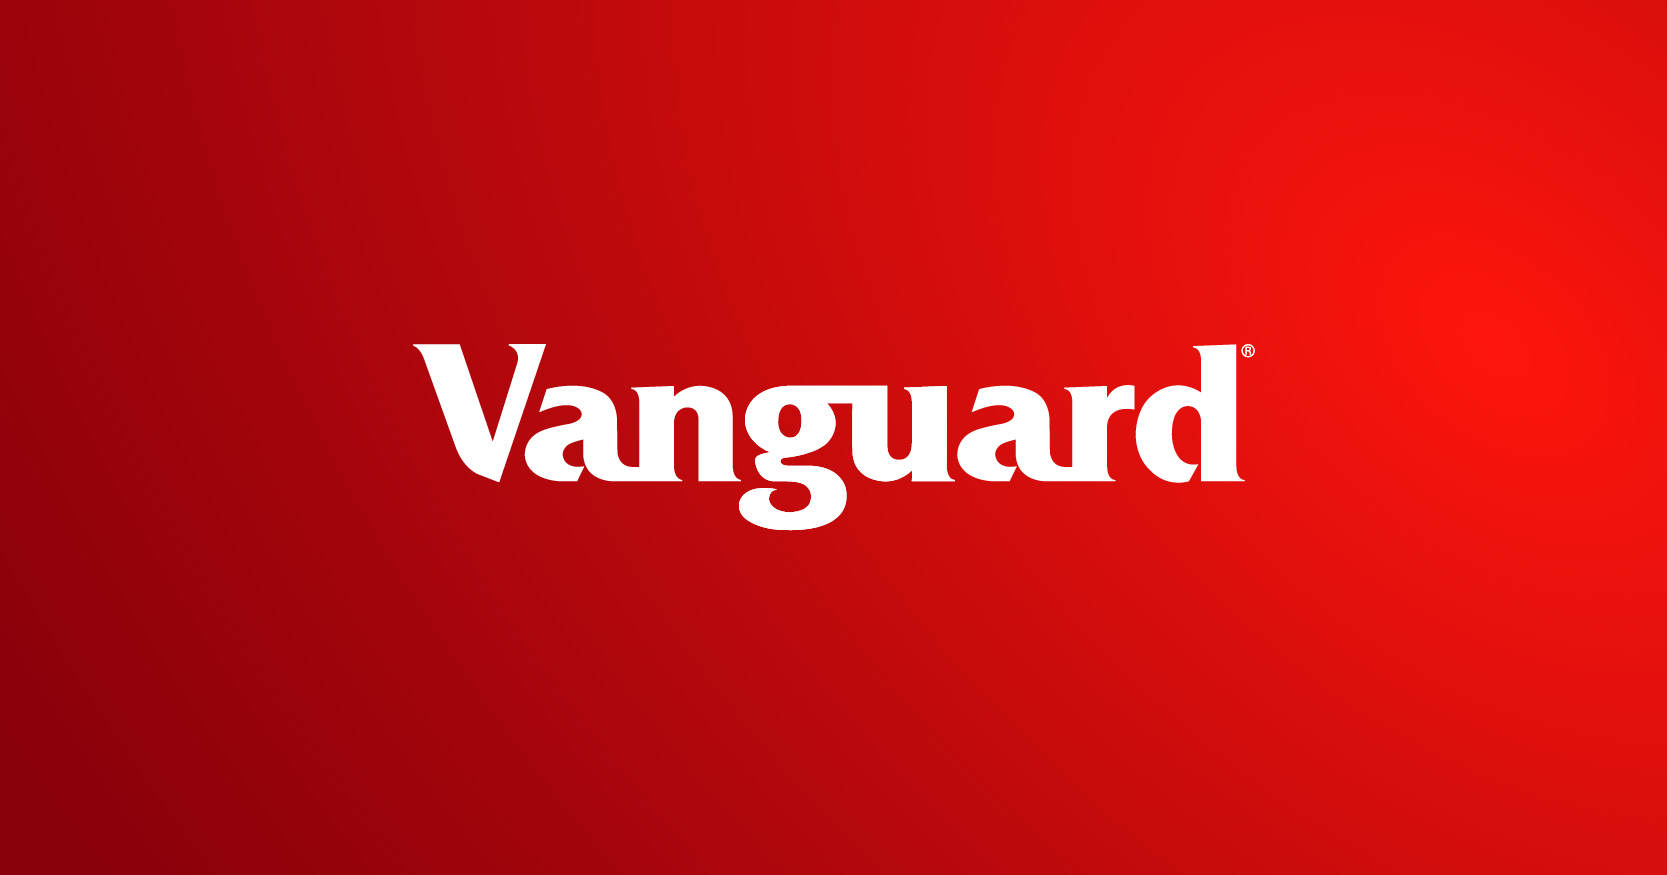 can i become investor in vanguard from czech republic